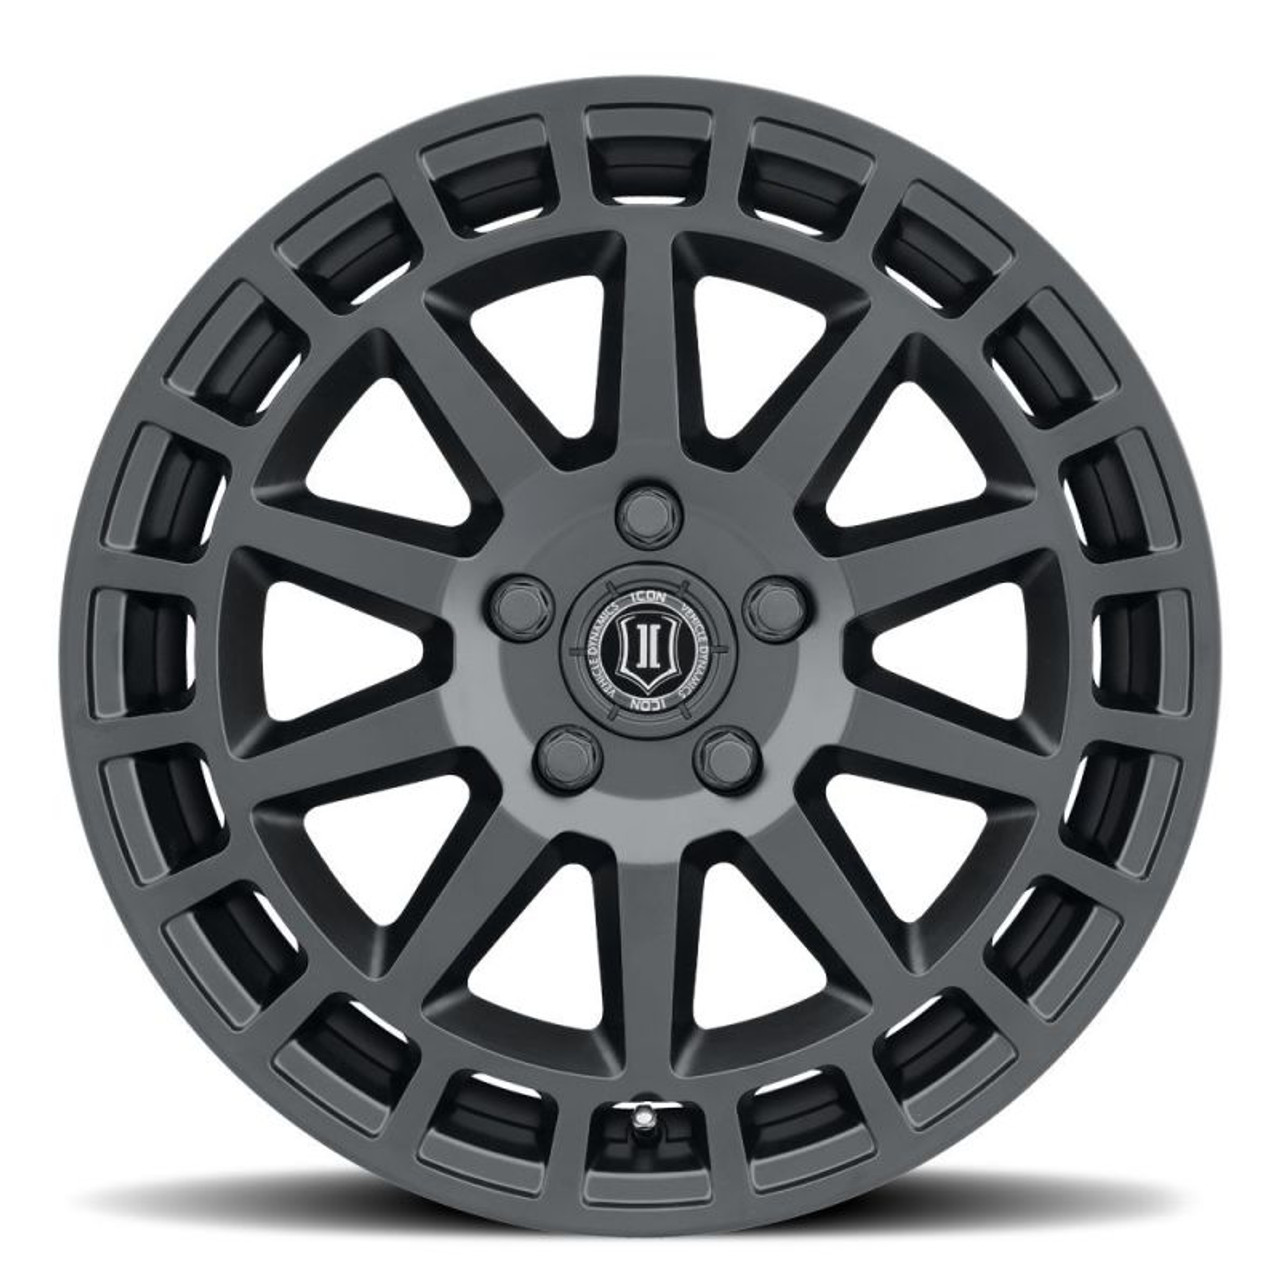 ICON Journey 17x8 5x4.5 38mm Offset 6in BS Satin Black Wheel - 7117806560SB Photo - Close Up